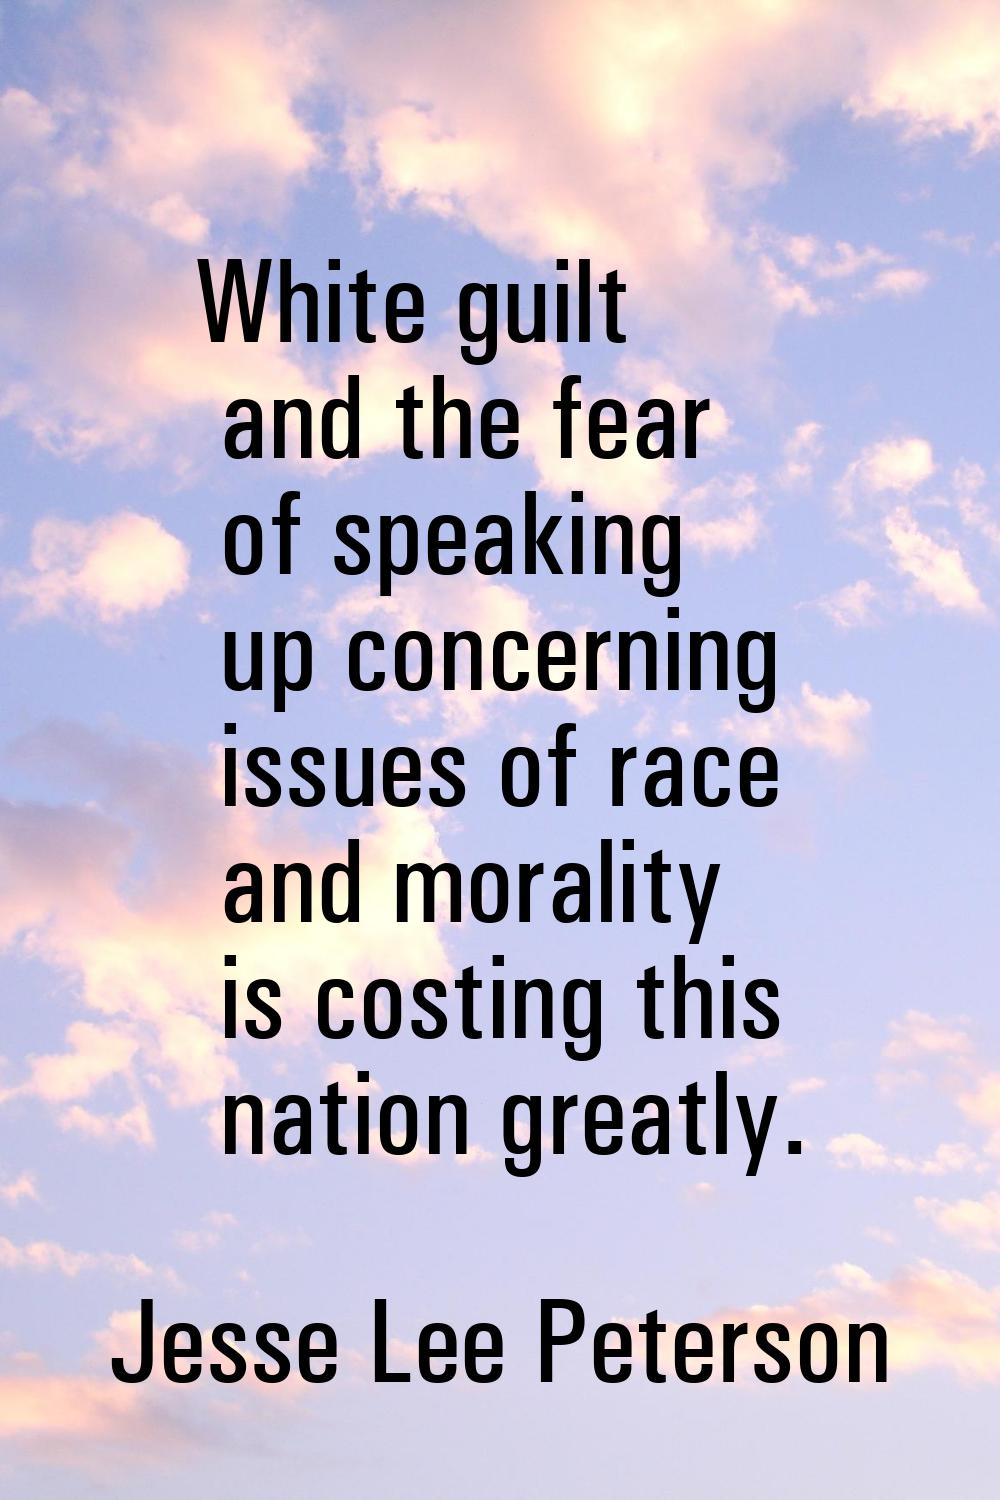 White guilt and the fear of speaking up concerning issues of race and morality is costing this nati